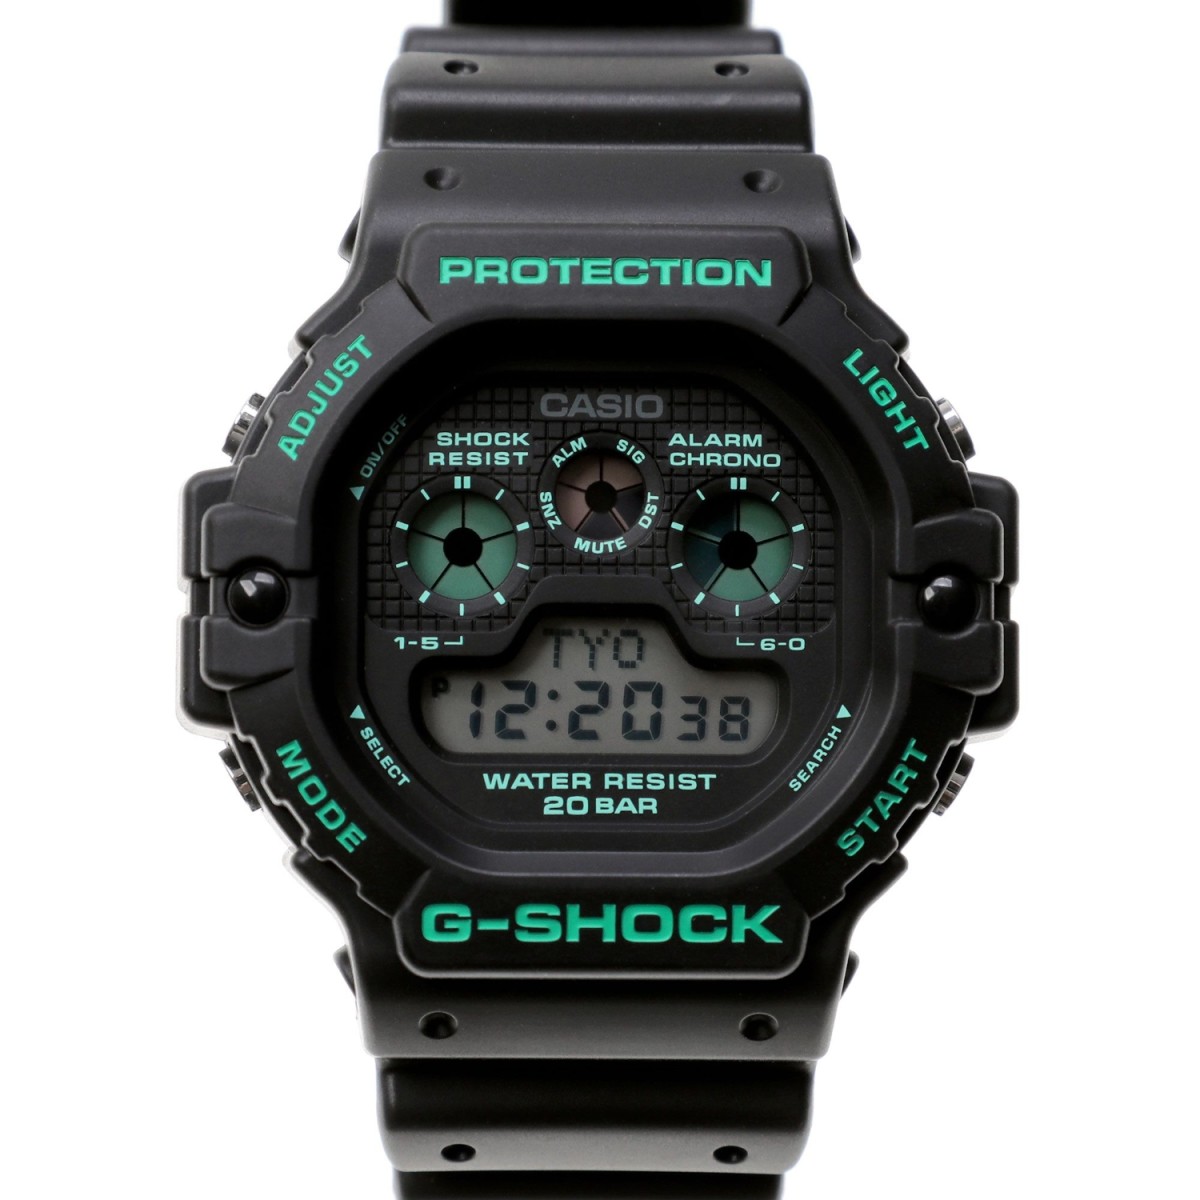 G-Shock and Porter release a special edition DW-5900 for the 